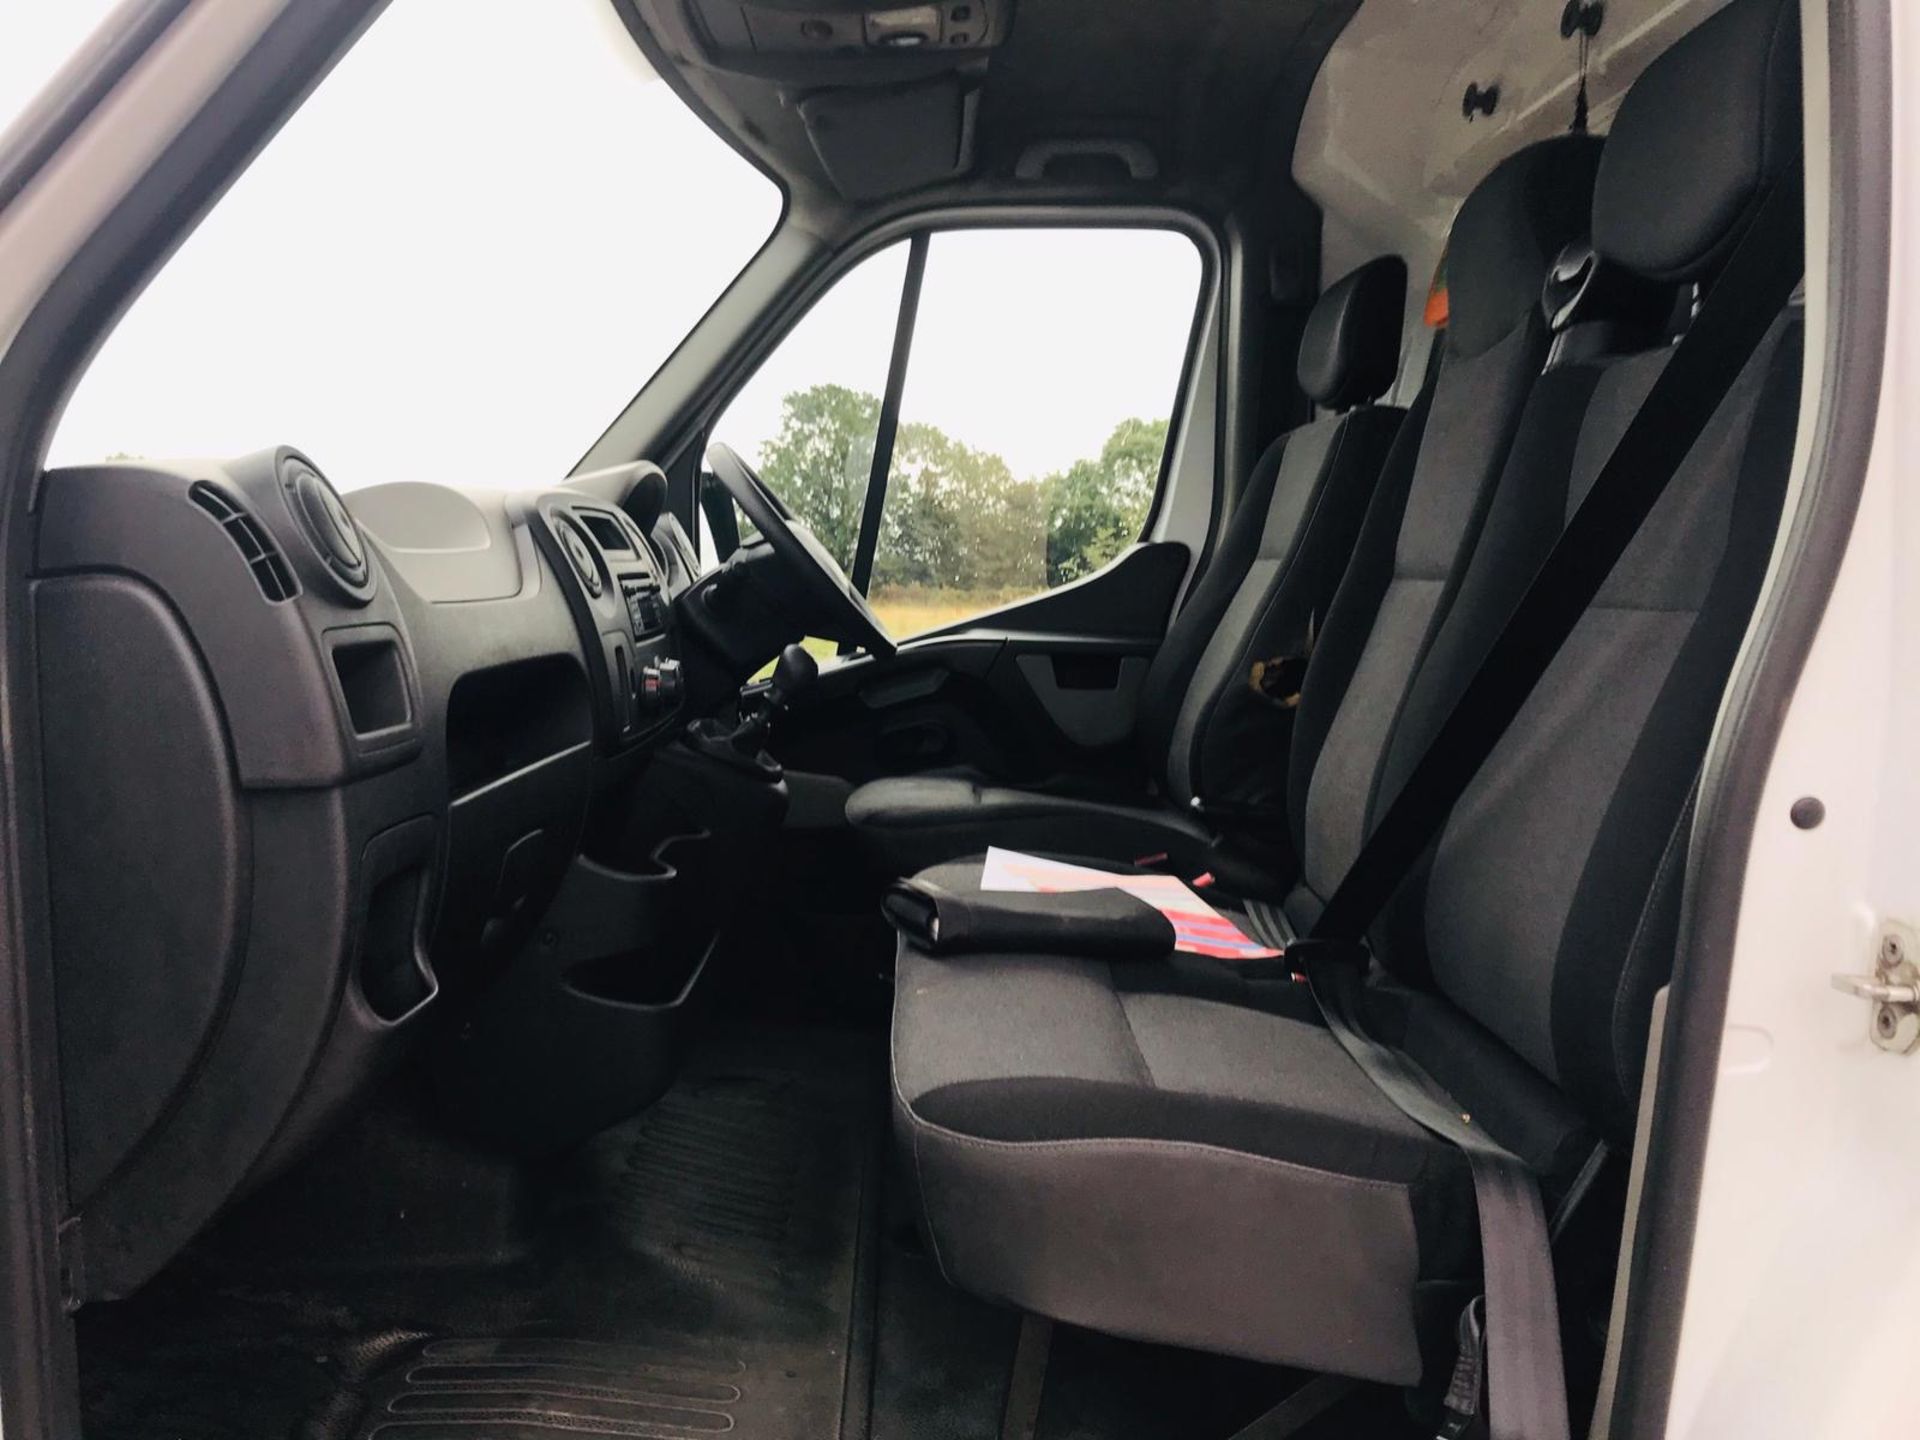 On Sale RENAULT MASTER *BUSINESS EDITION* LWB HI-ROOF (2015 MODEL) '2.3 DCI - 125 BHP - 6 SPEED' - Image 14 of 19